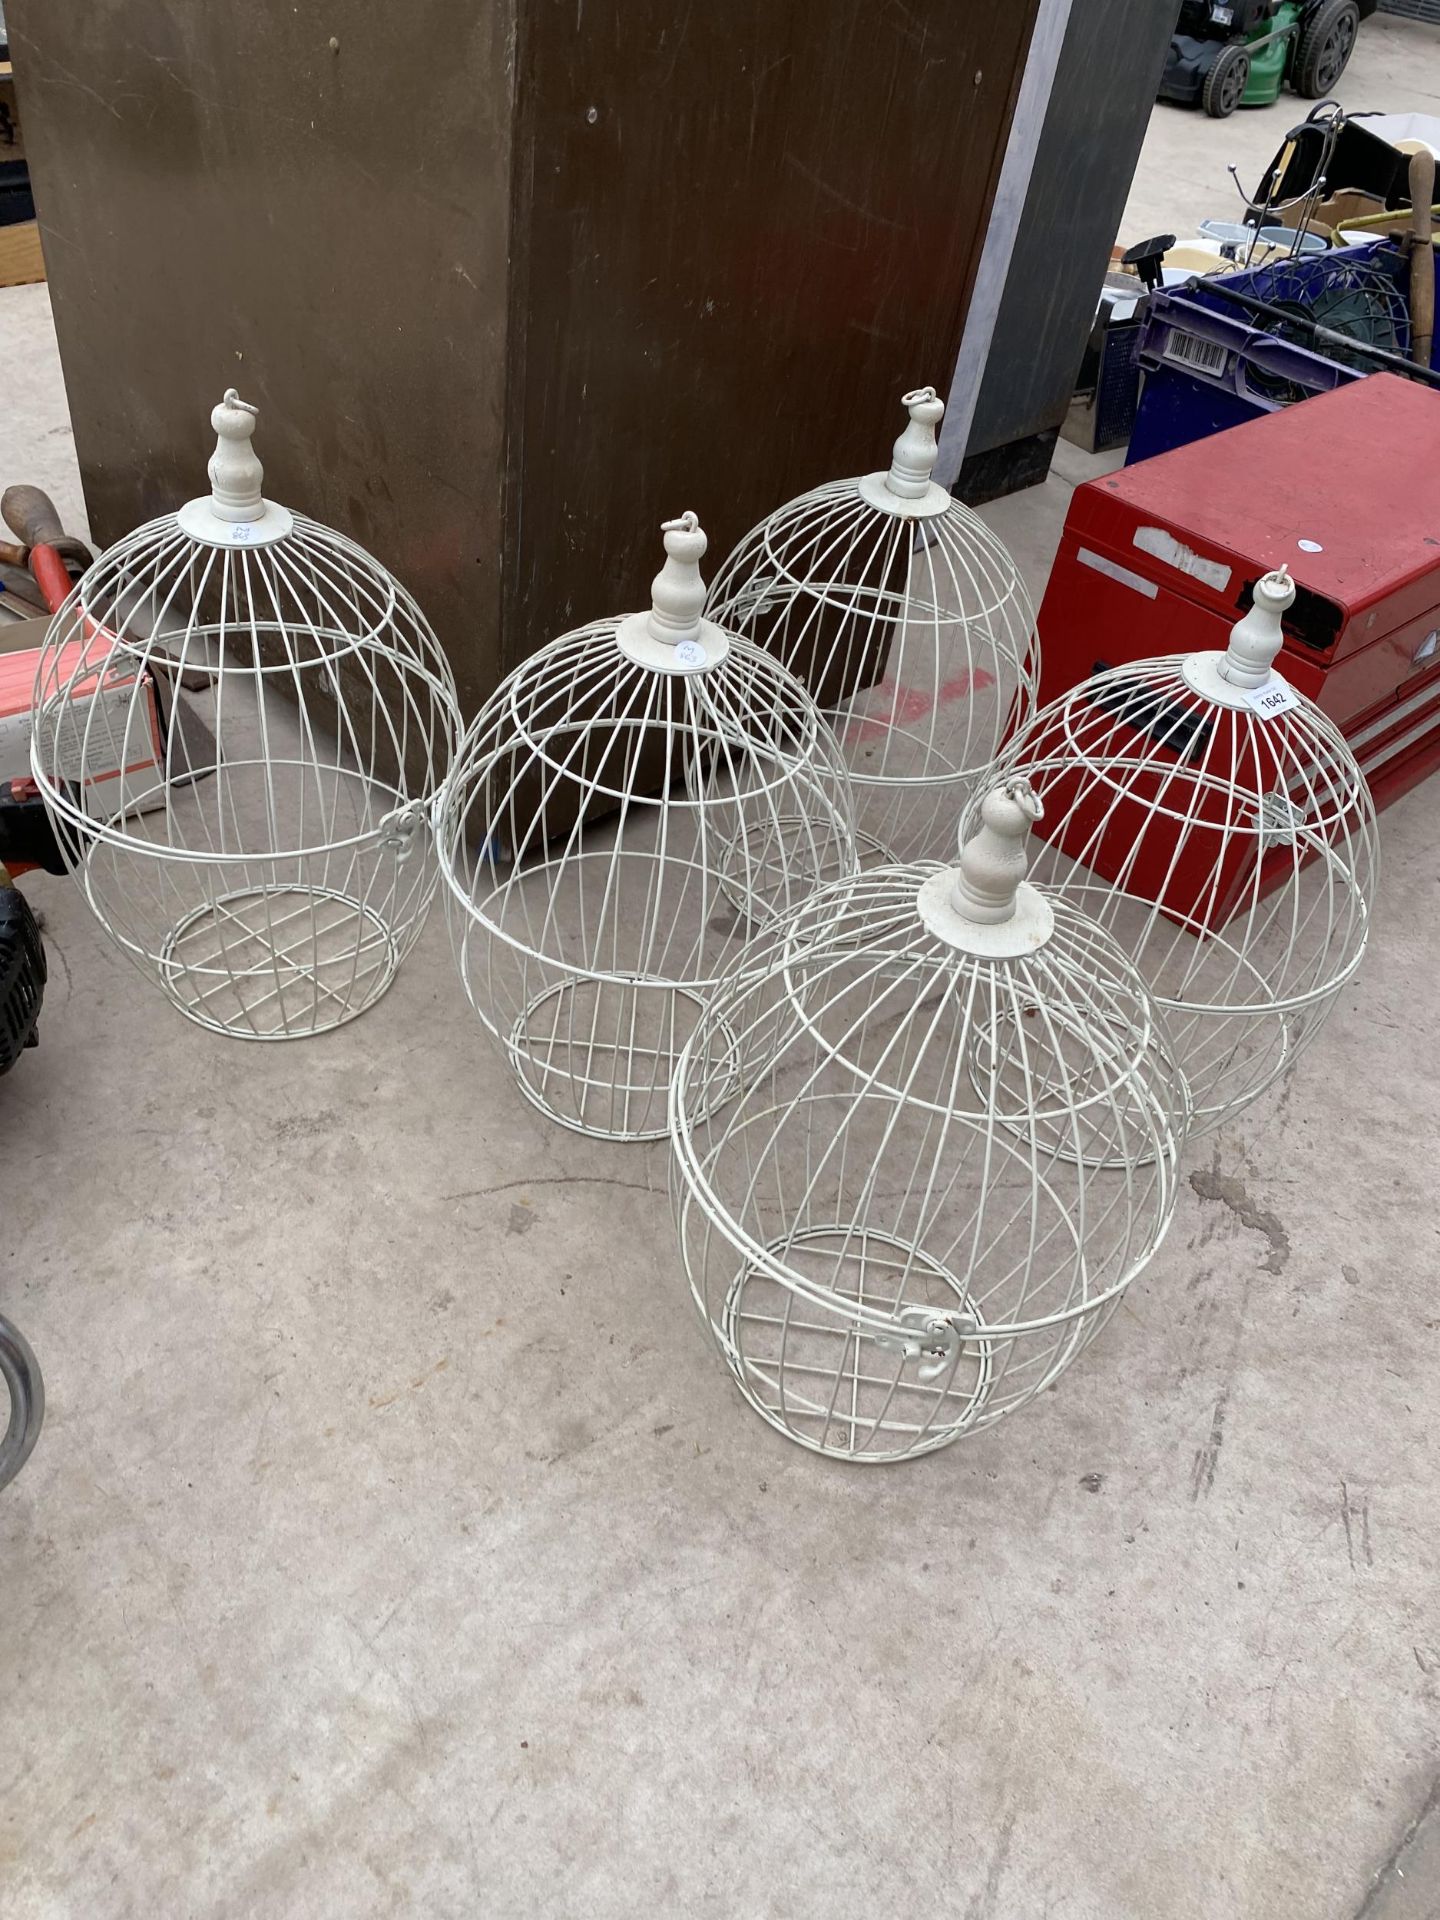 FIVE DECORATIVE METAL BIRD CAGE STYLE PLANTERS - Image 2 of 3